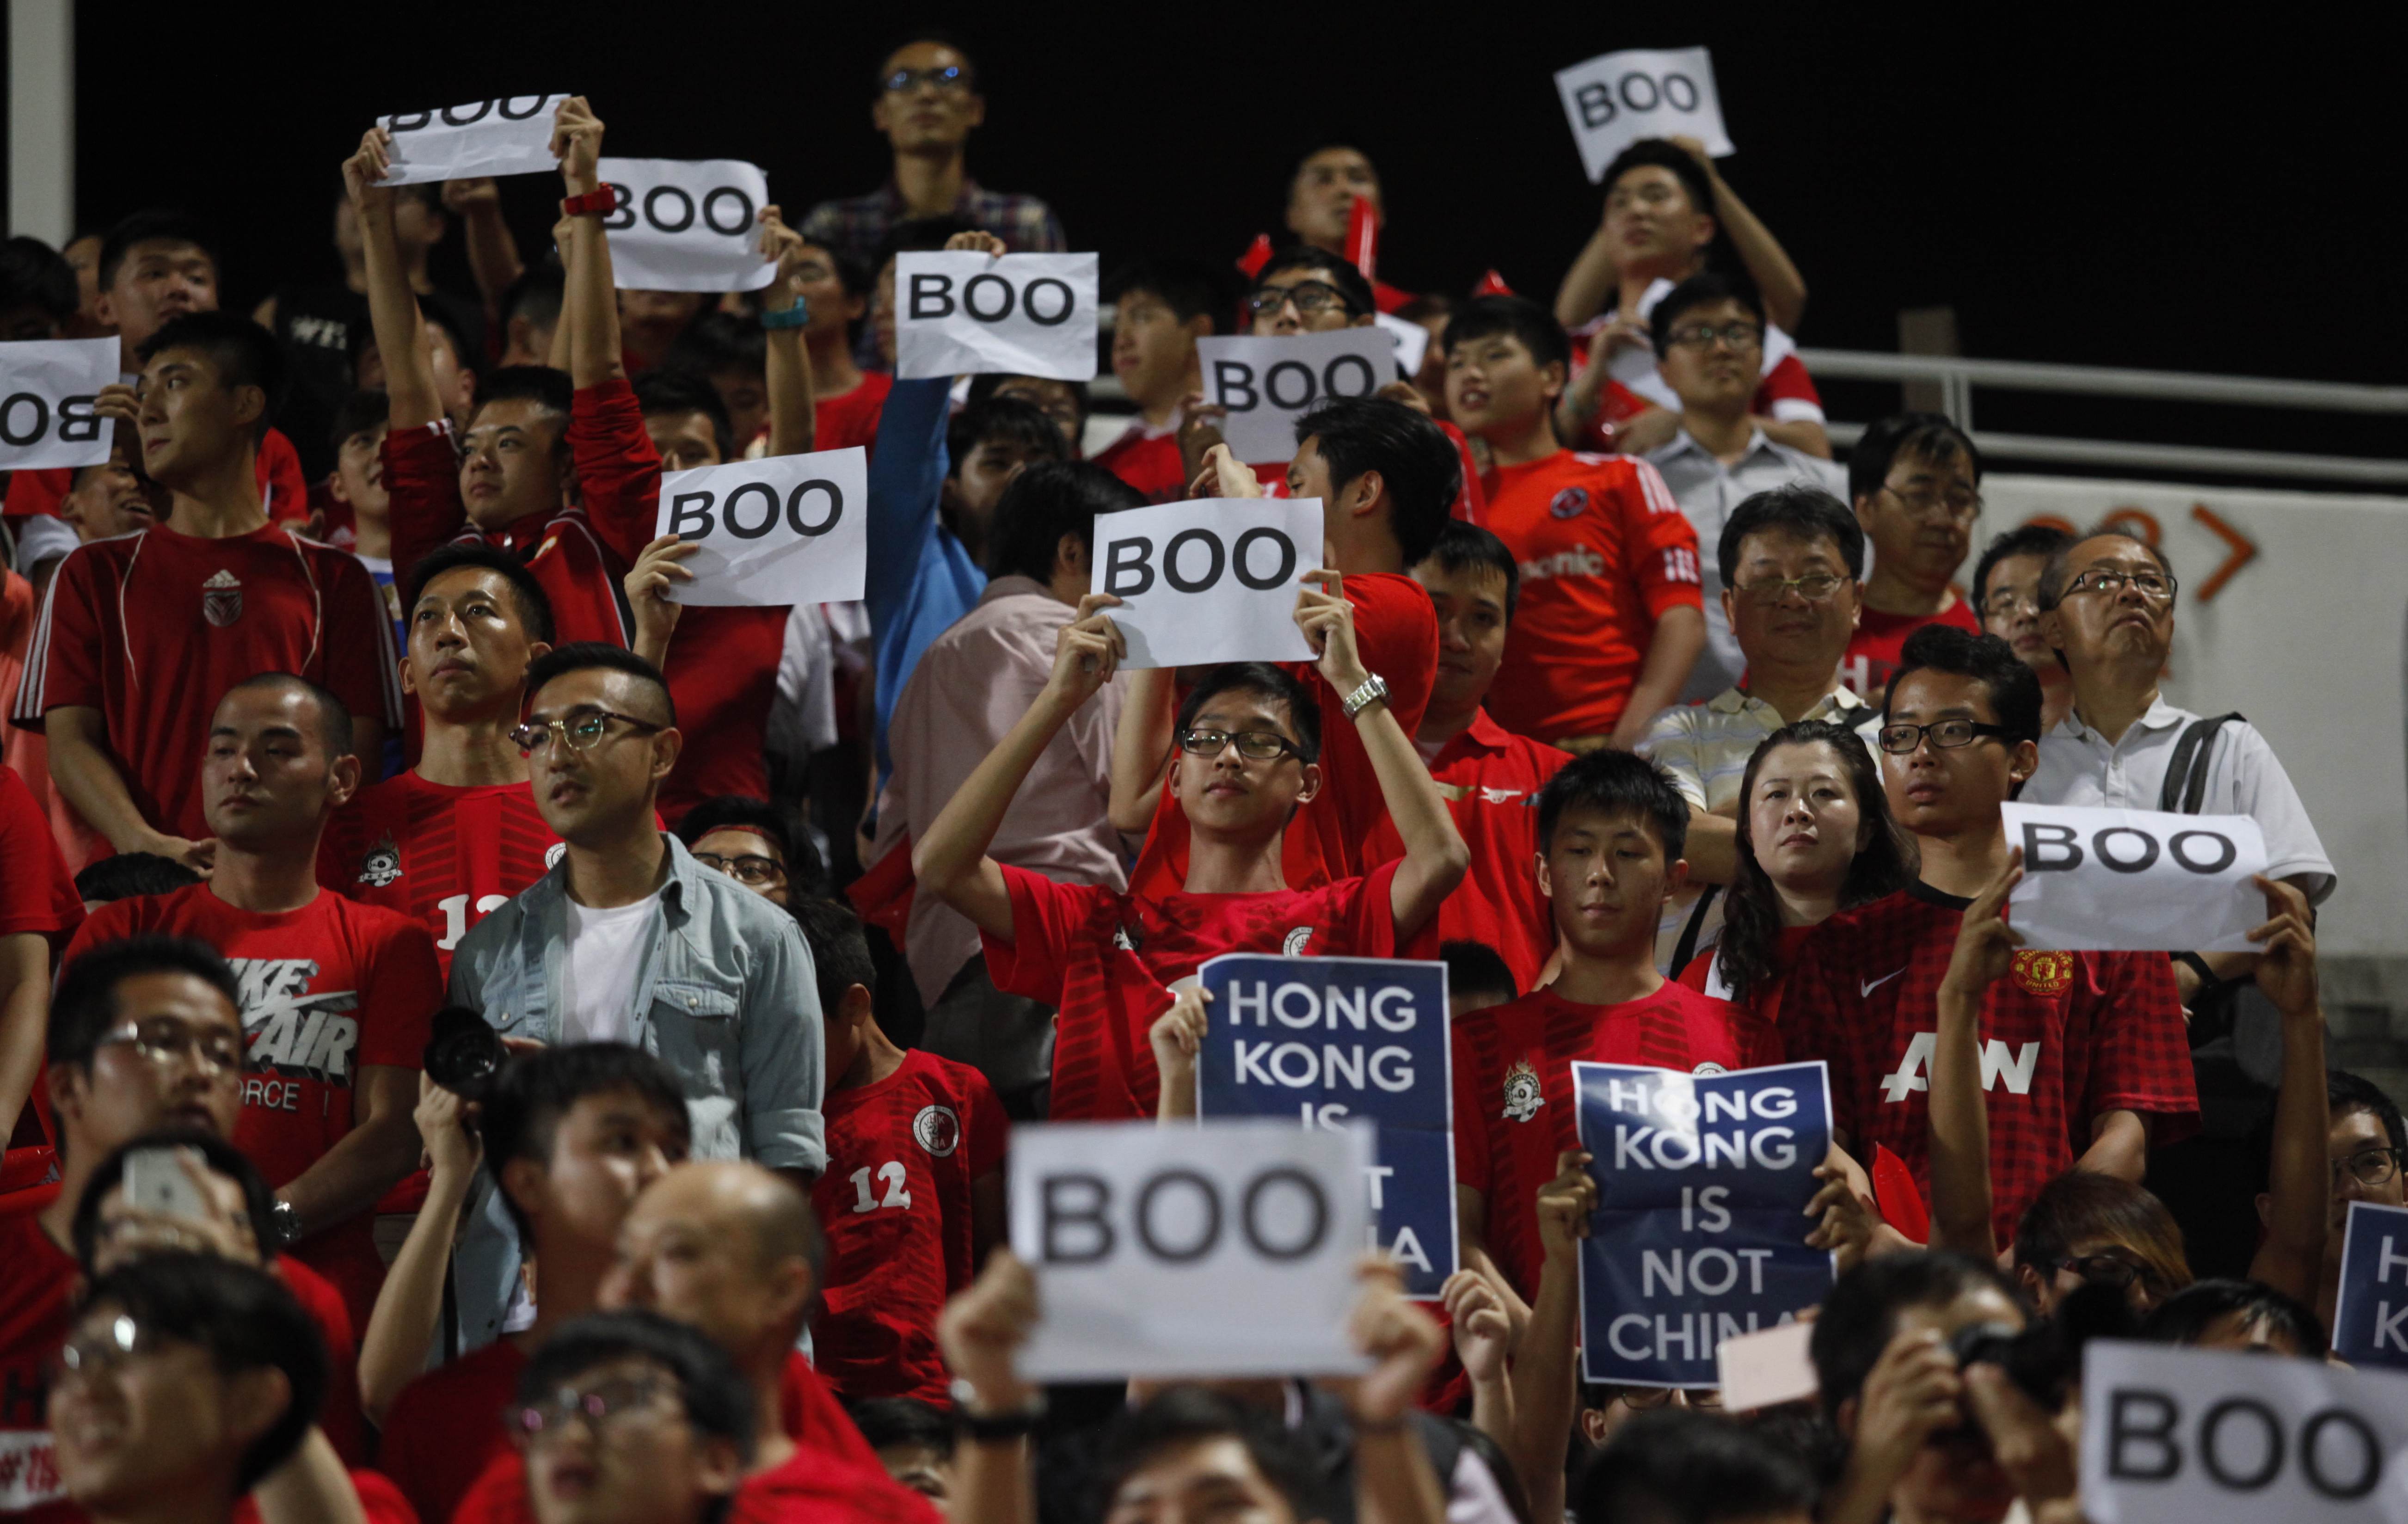 Hong Kong fans hold up signs that read “Boo” while the national anthem was being played back in 2015. More ‘creative’ responses to the new national anthem law are likely next October. Photo: AFP PHOTO